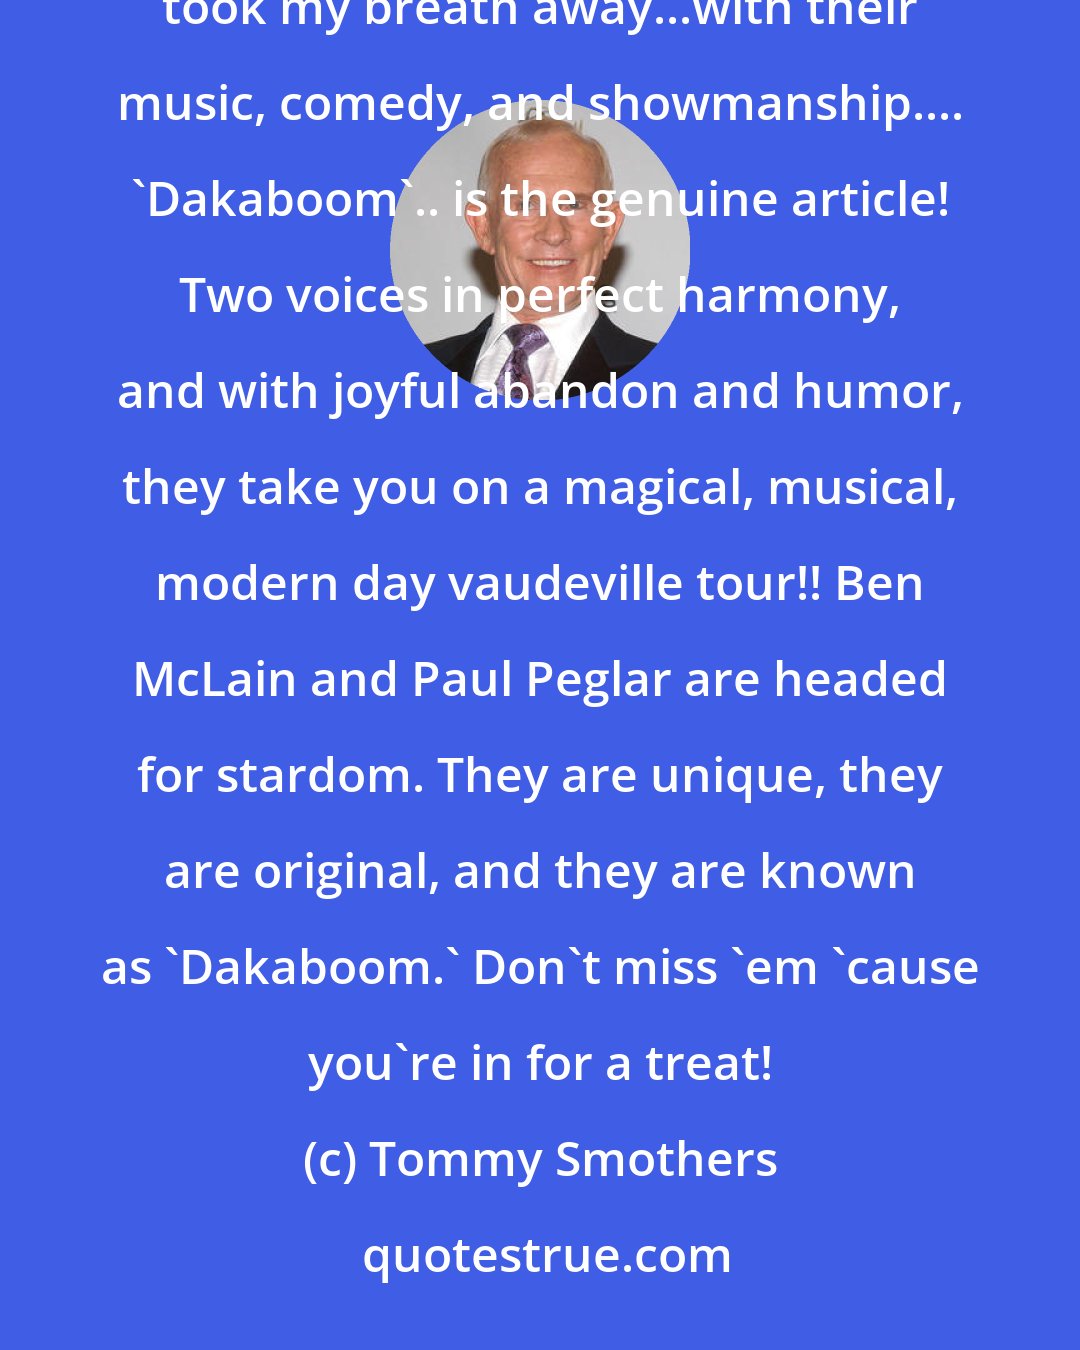 Tommy Smothers: I heard there were two local guys in town doing songs and comedy so I thought I'd take a look....they took my breath away...with their music, comedy, and showmanship.... 'Dakaboom'.. is the genuine article! Two voices in perfect harmony, and with joyful abandon and humor, they take you on a magical, musical, modern day vaudeville tour!! Ben McLain and Paul Peglar are headed for stardom. They are unique, they are original, and they are known as 'Dakaboom.' Don't miss 'em 'cause you're in for a treat!